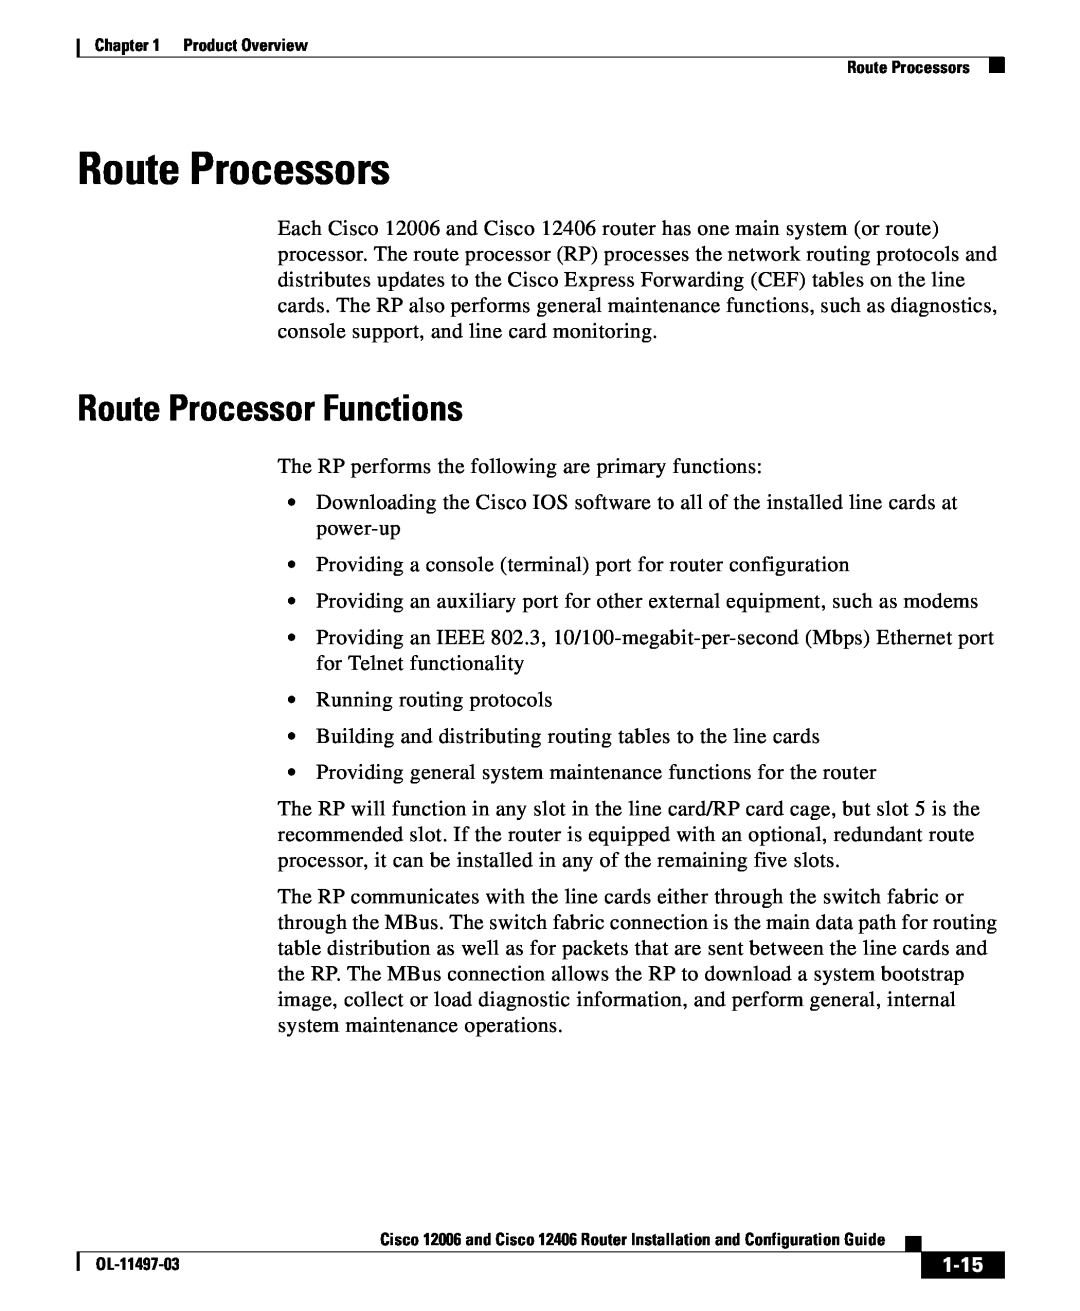 Cisco Systems 12006 series, 12406 series manual Route Processors, Route Processor Functions, 1-15 